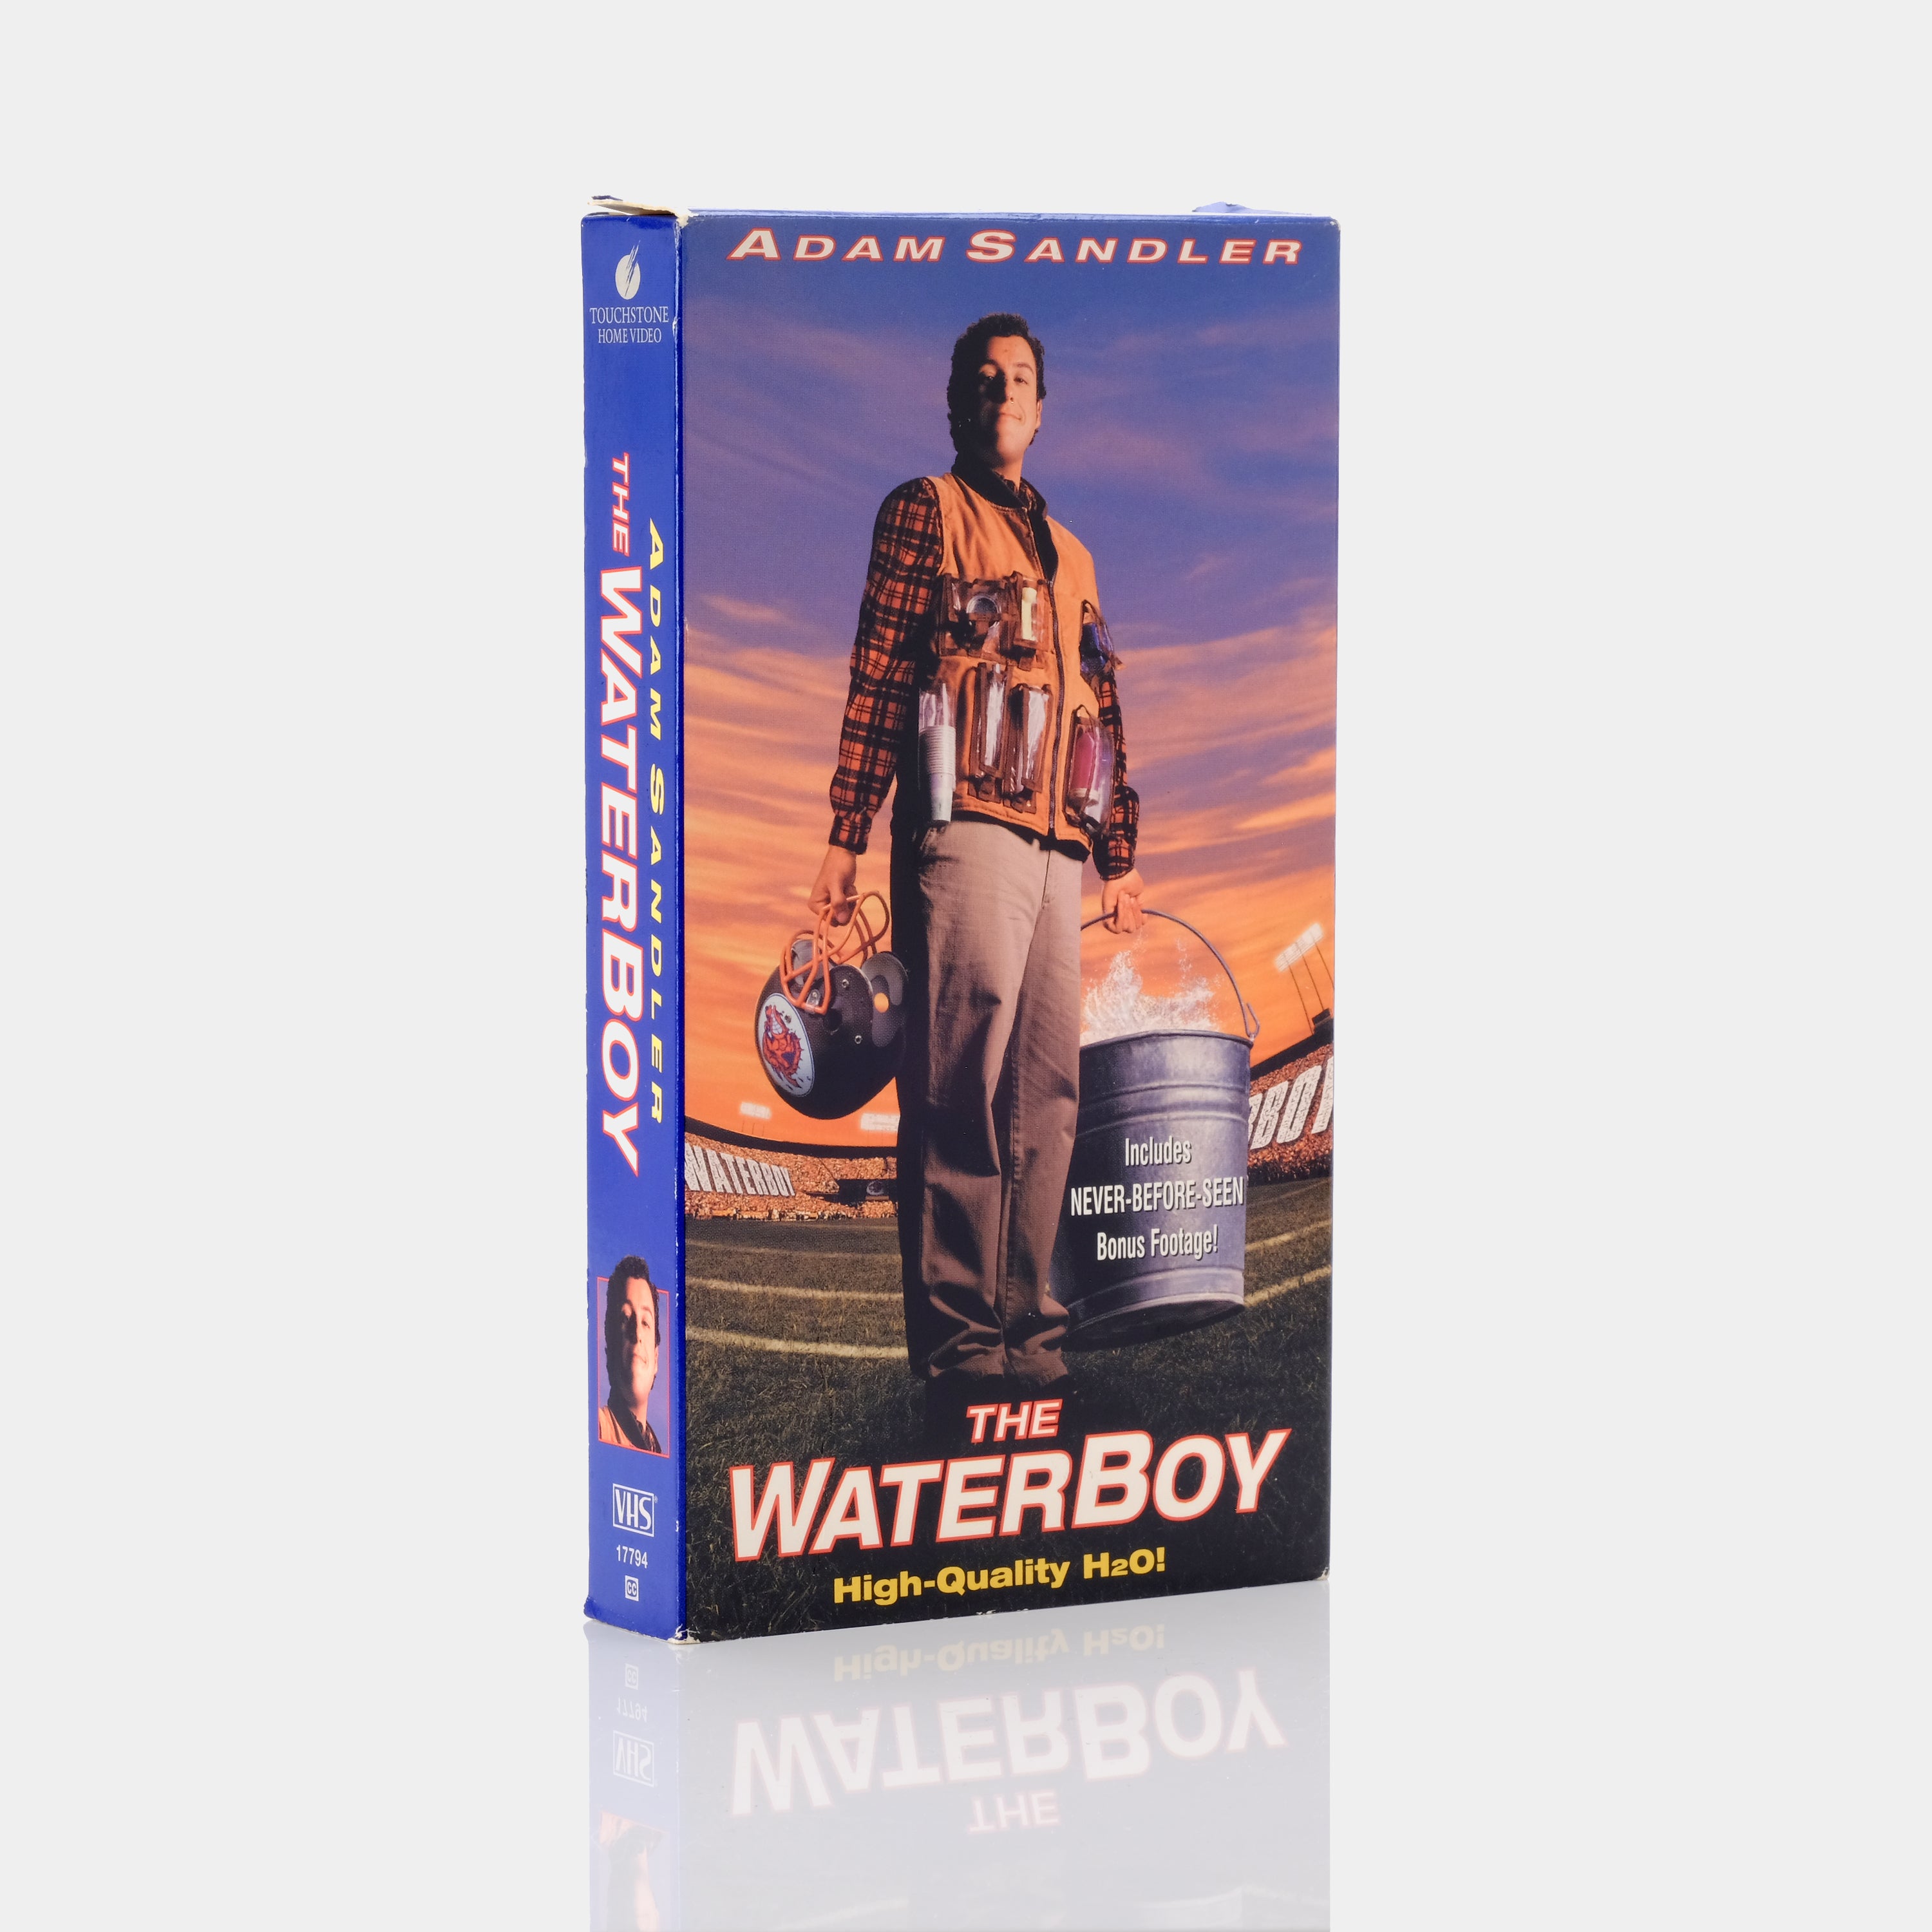 The WaterBoy VHS Tape